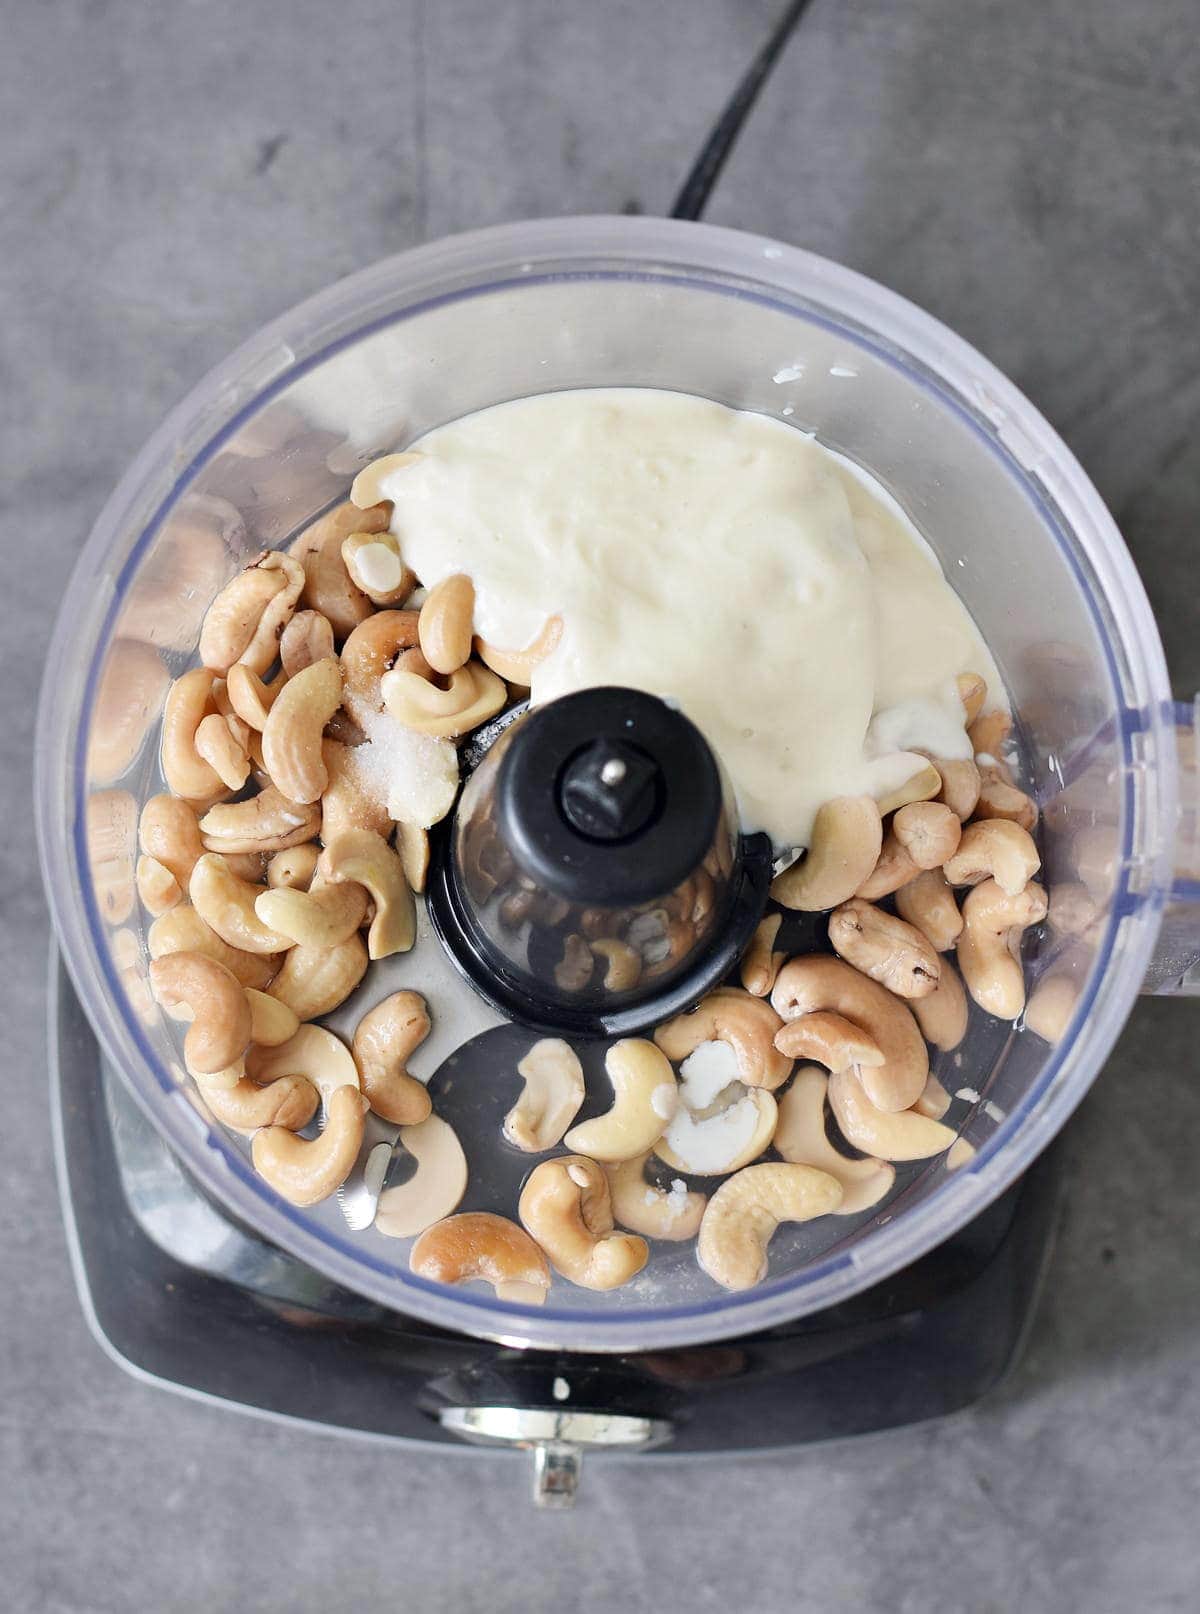 https://elavegan.com/wp-content/uploads/2020/06/all-ingredients-for-dairy-free-sour-cream-in-a-food-processor.jpg